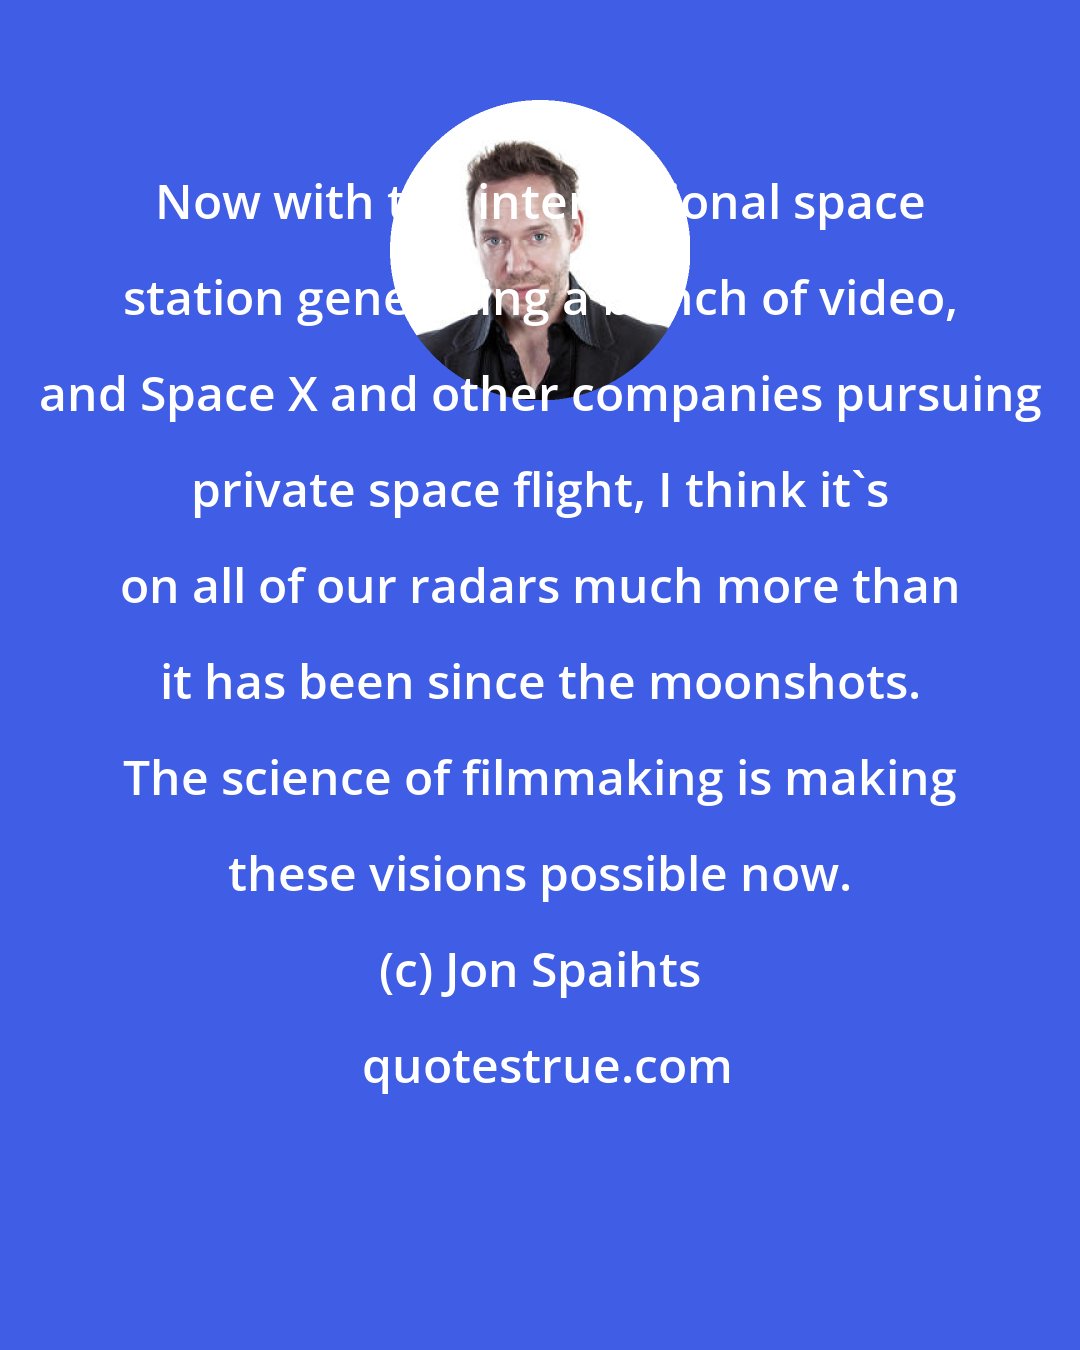 Jon Spaihts: Now with the international space station generating a bunch of video, and Space X and other companies pursuing private space flight, I think it's on all of our radars much more than it has been since the moonshots. The science of filmmaking is making these visions possible now.